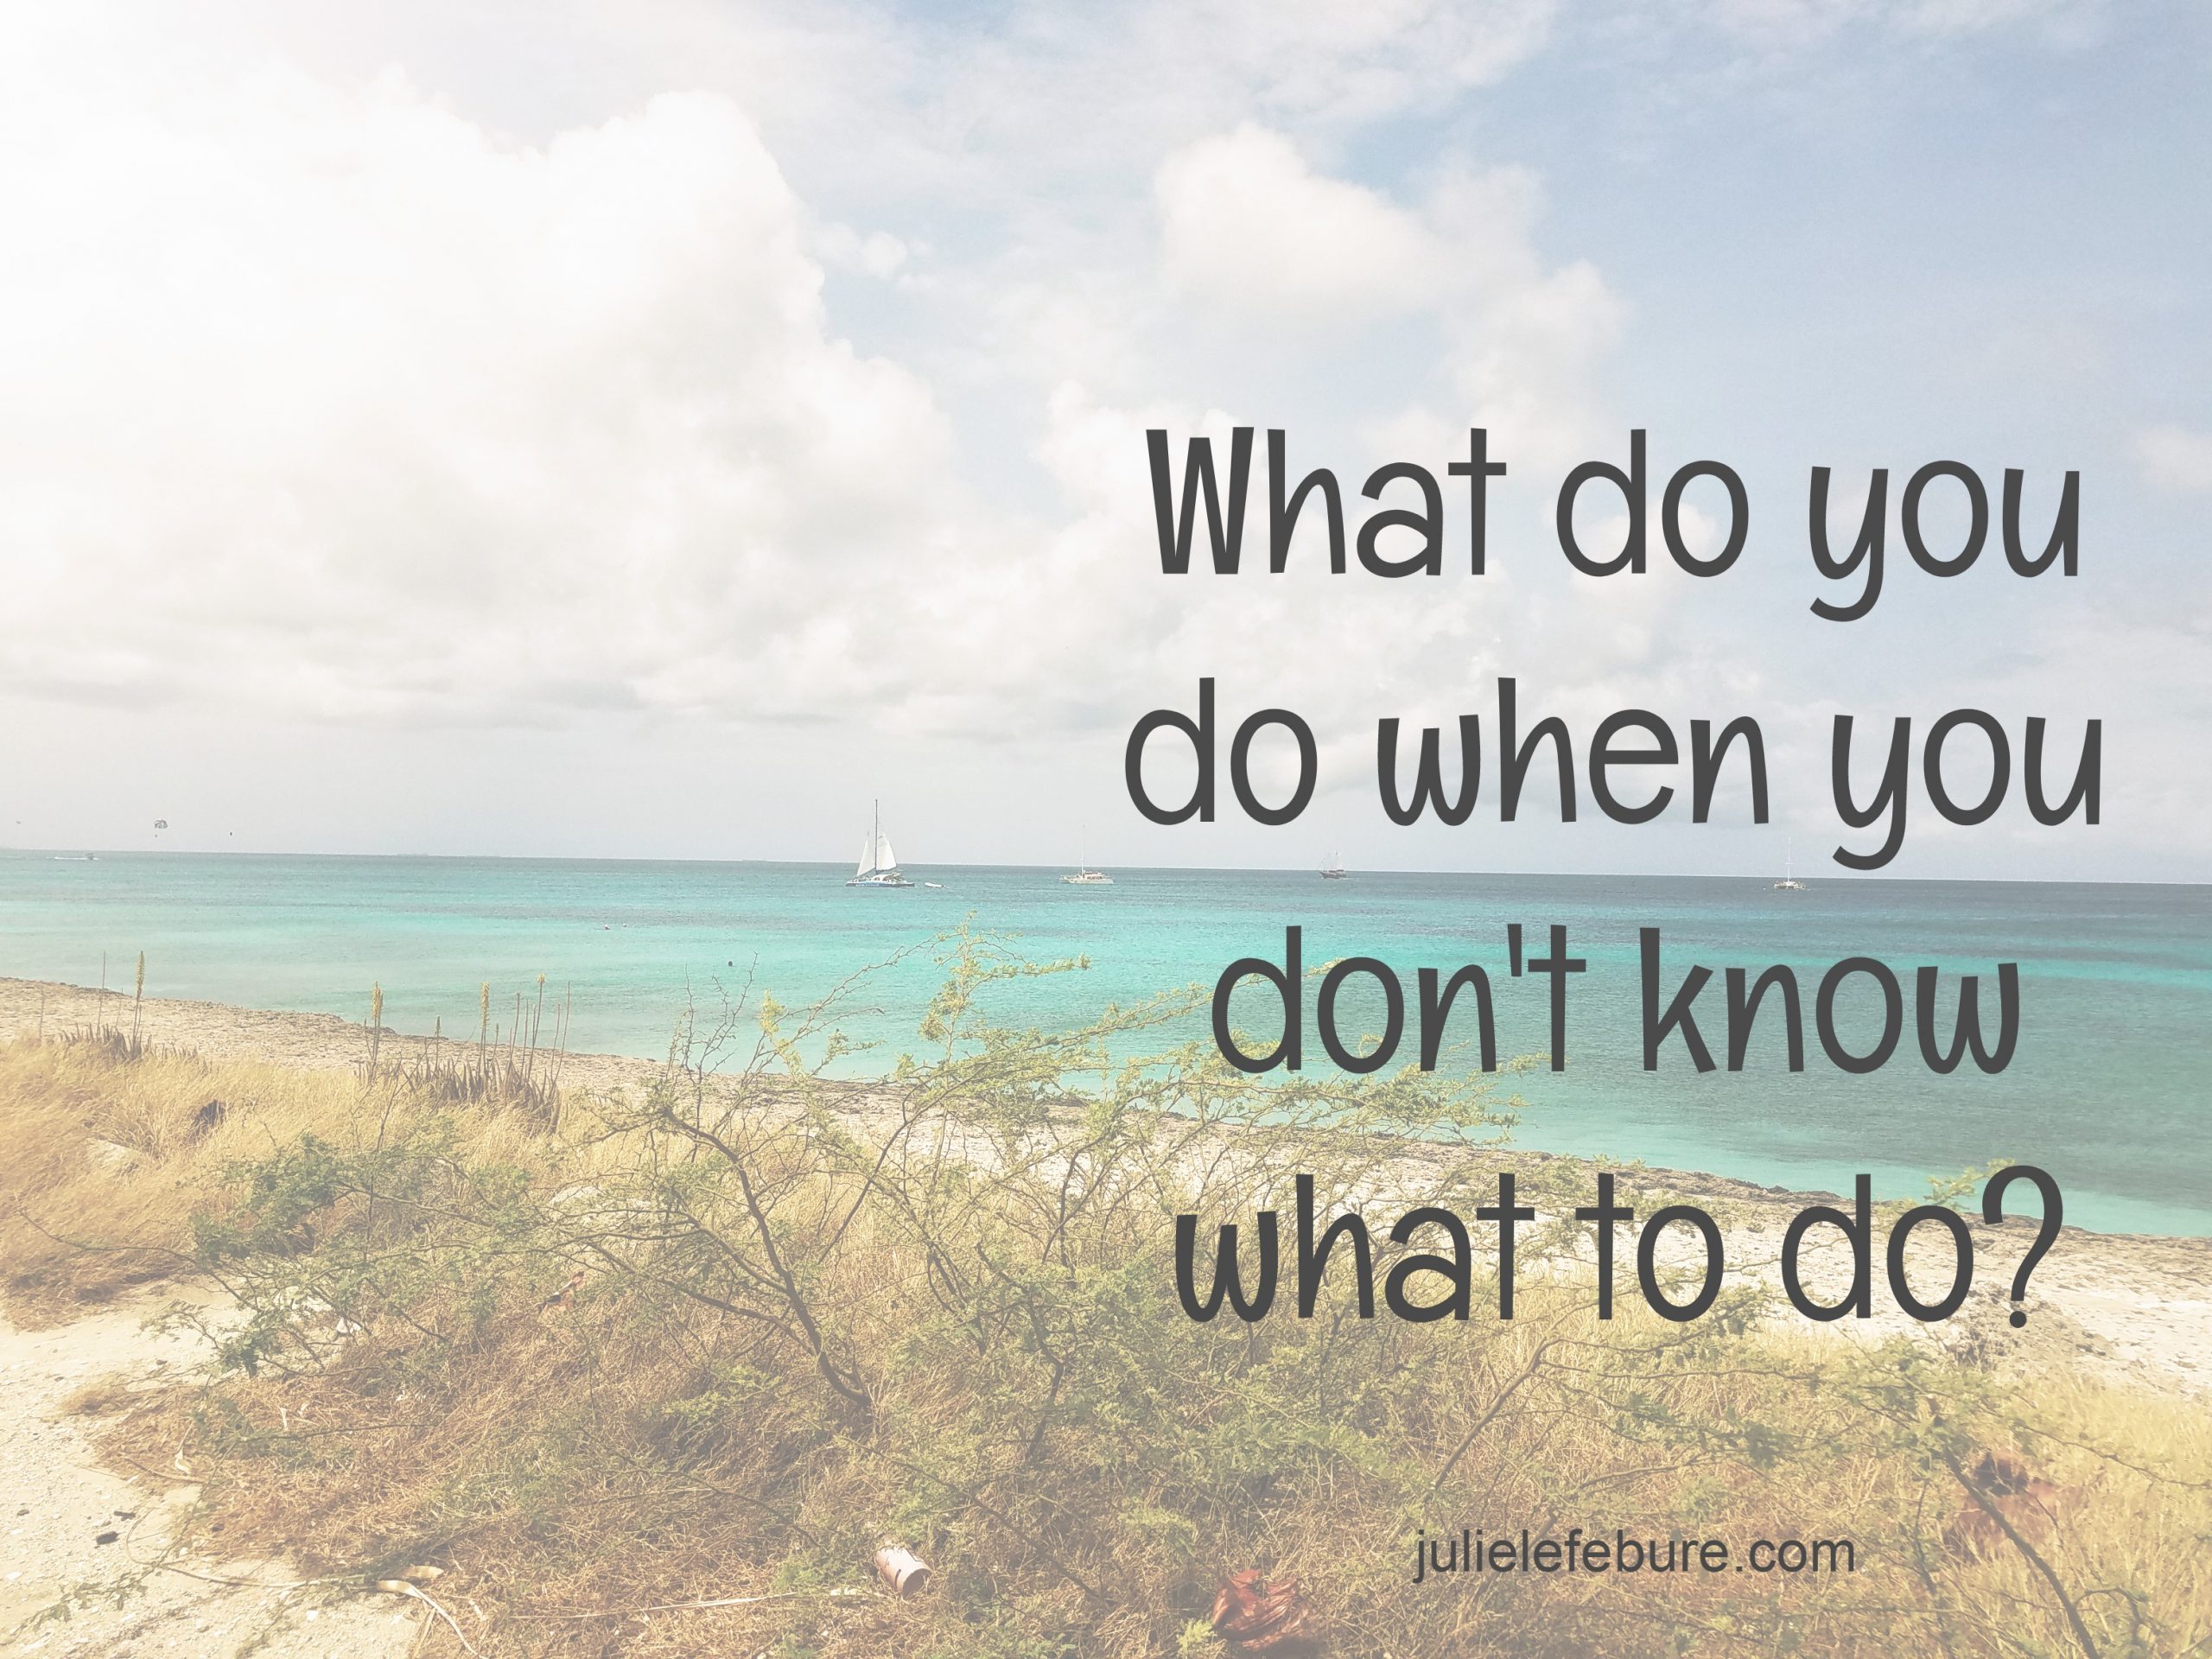 What Do You Do When You Don’t Know What To Do?